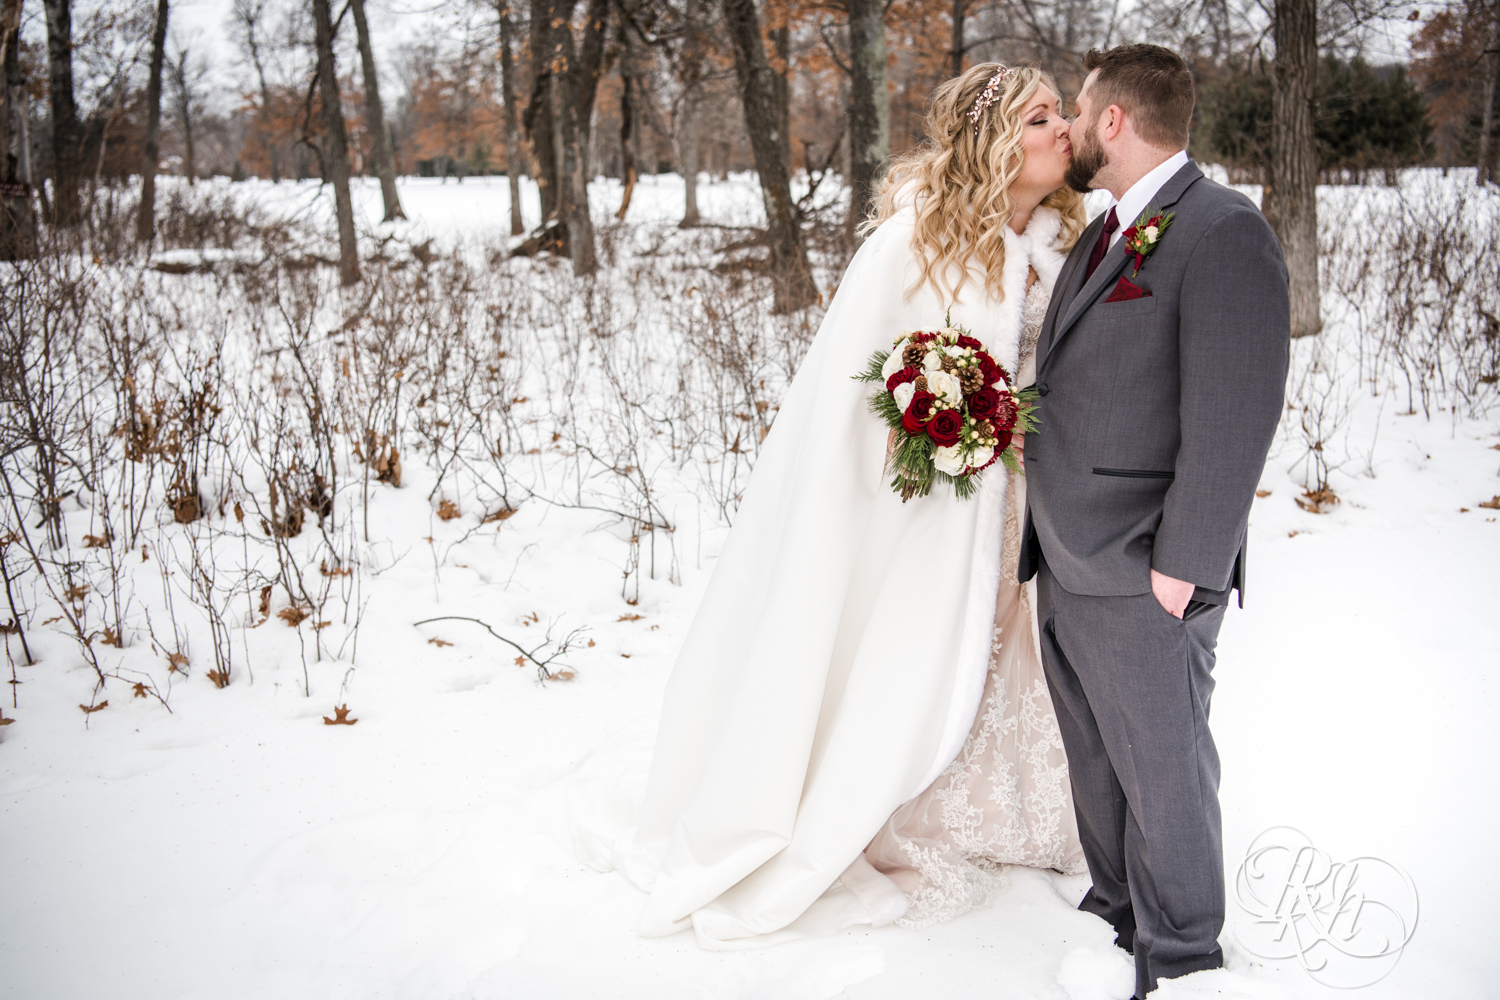 Bride and groom kiss in snow during winter wedding at Whitefish Lodge in Crosslake, Minnesota.